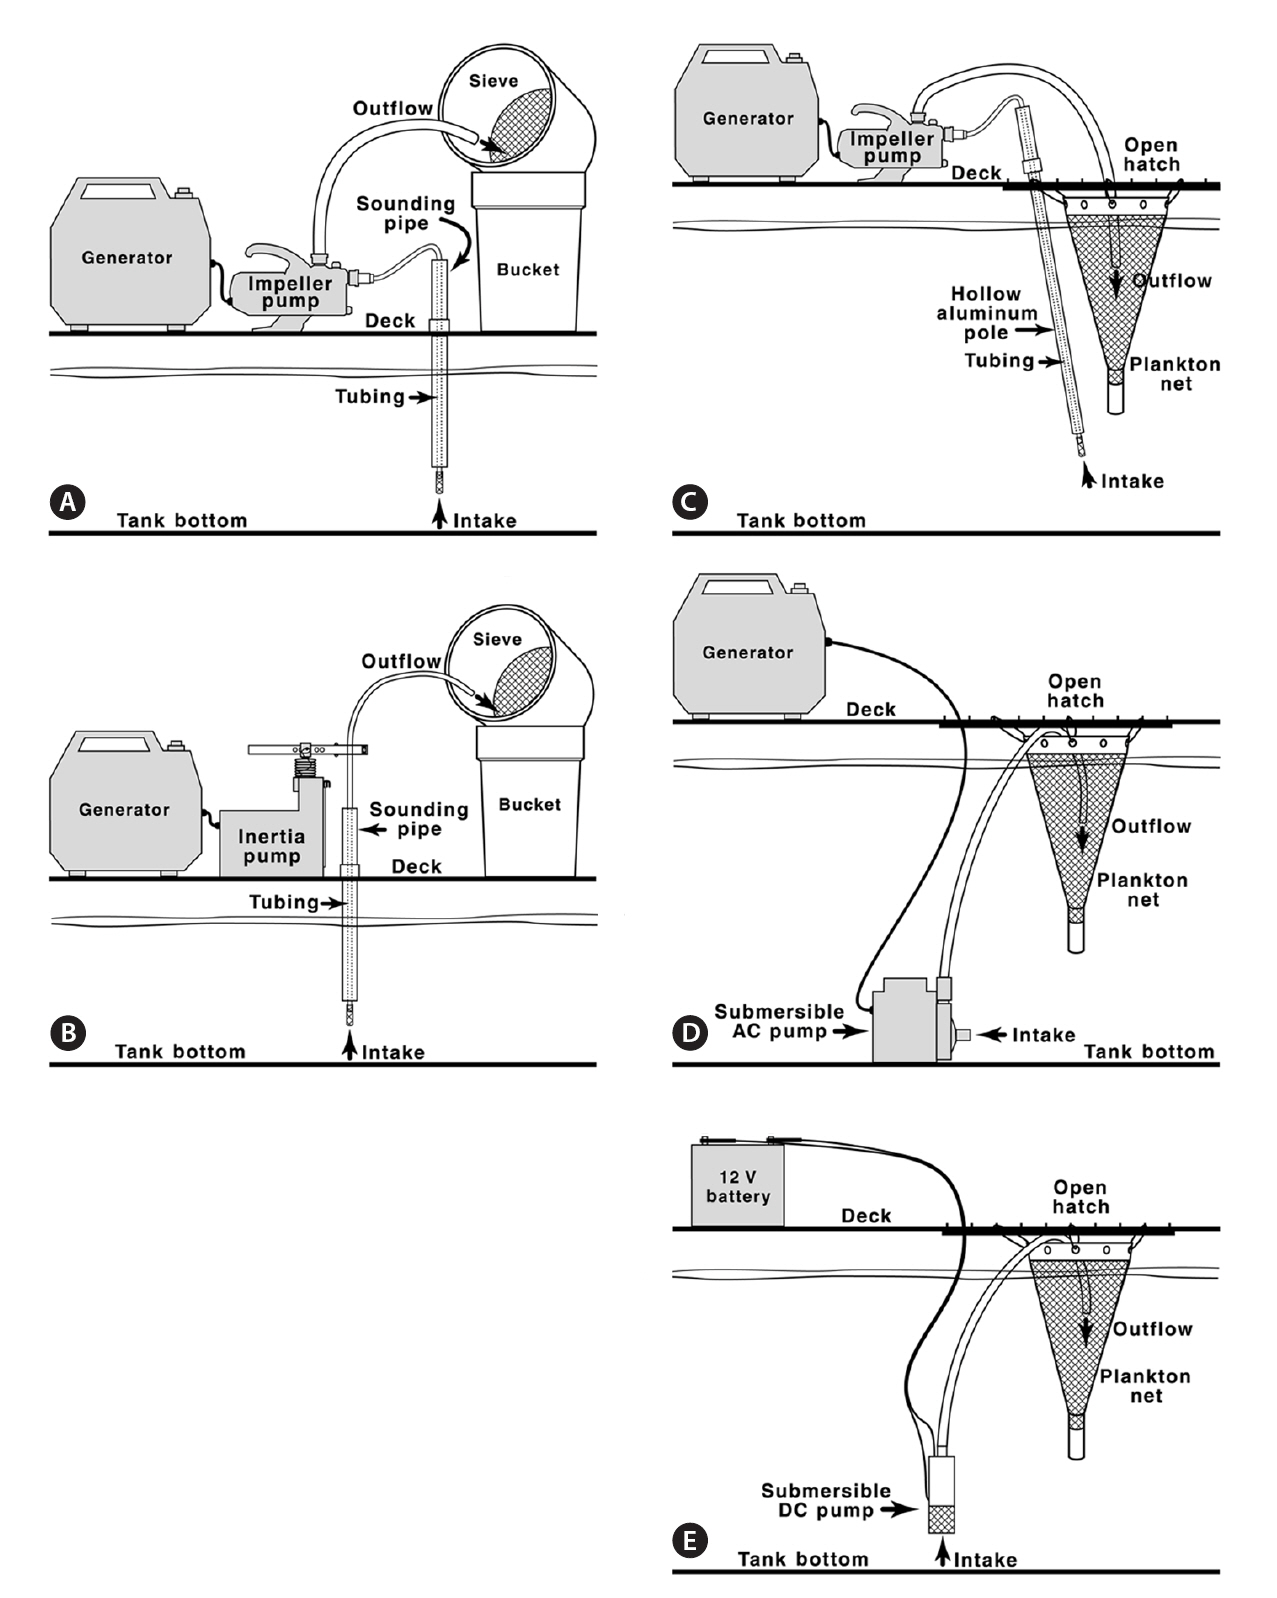 Schematic drawings of ballast sampling methods. (A) Impeller. (B) Inertia. (C) Directed intake. (D) AC submersible. (E) DC submersible.